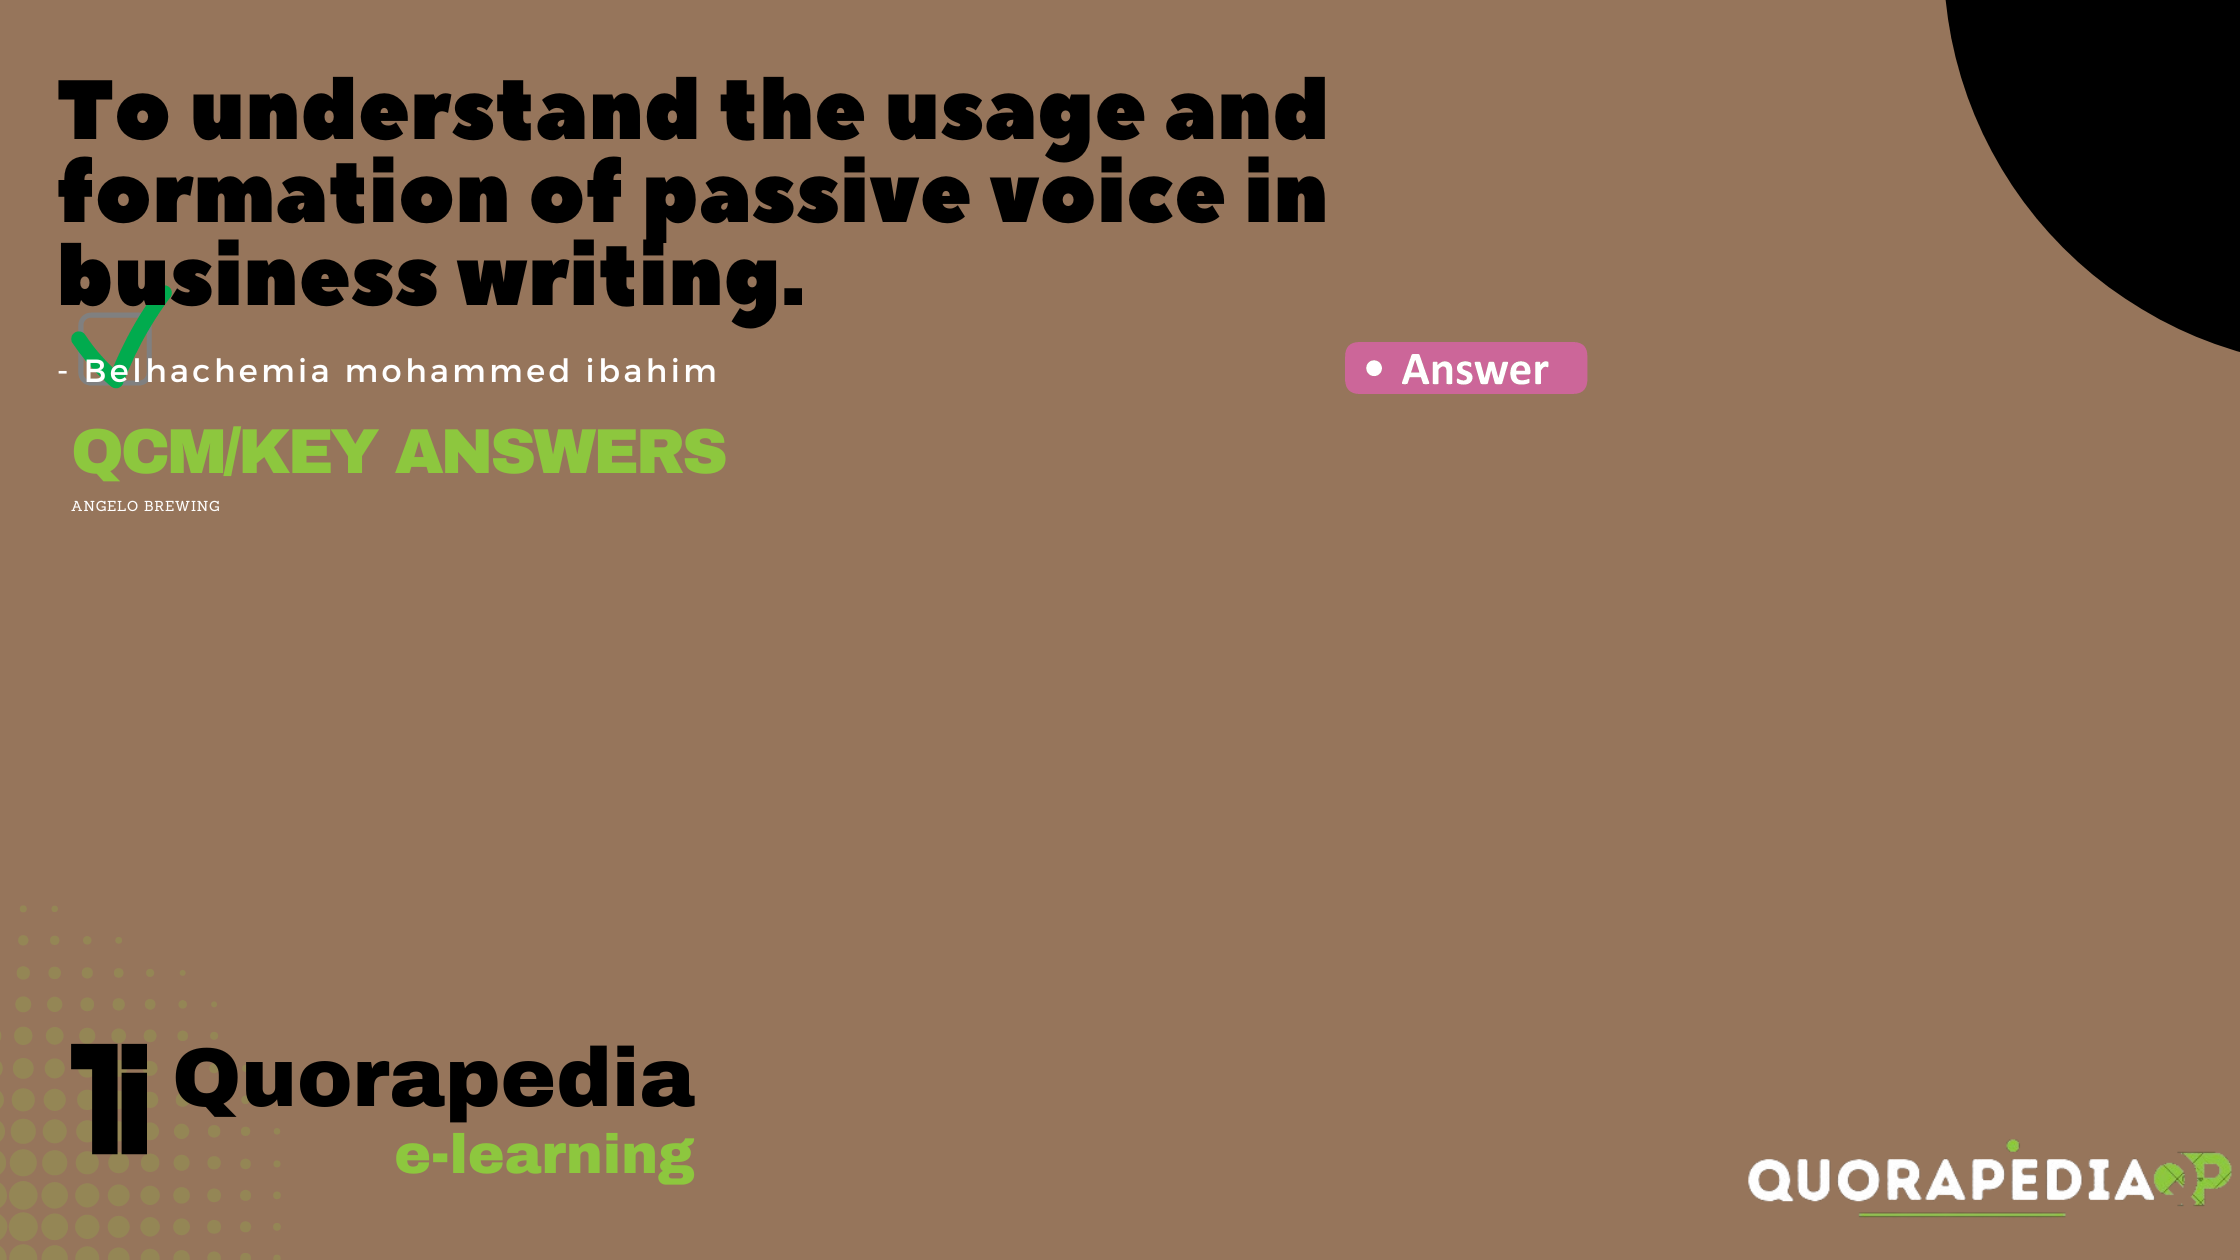 To understand the usage and formation of passive voice in business writing.